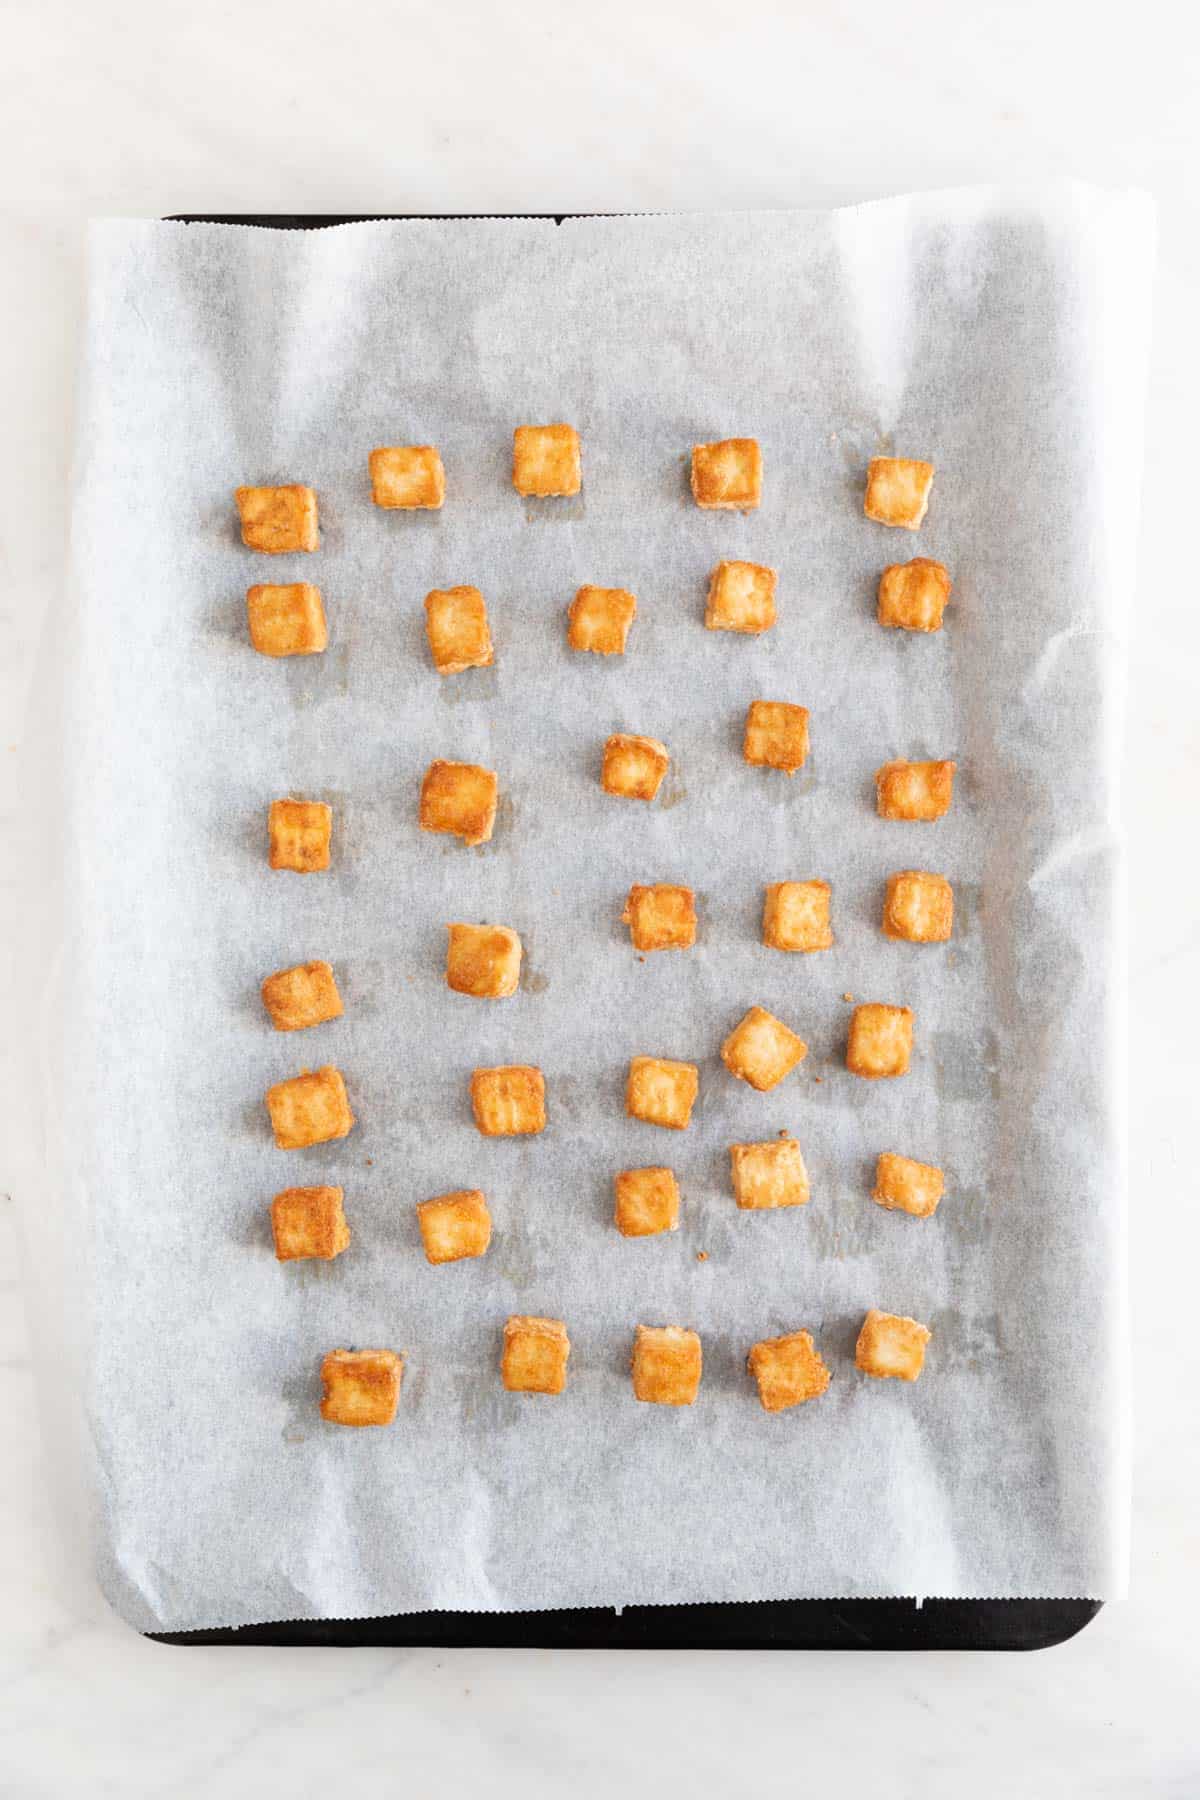 Tofu cubes onto a lined baking sheet after baking.